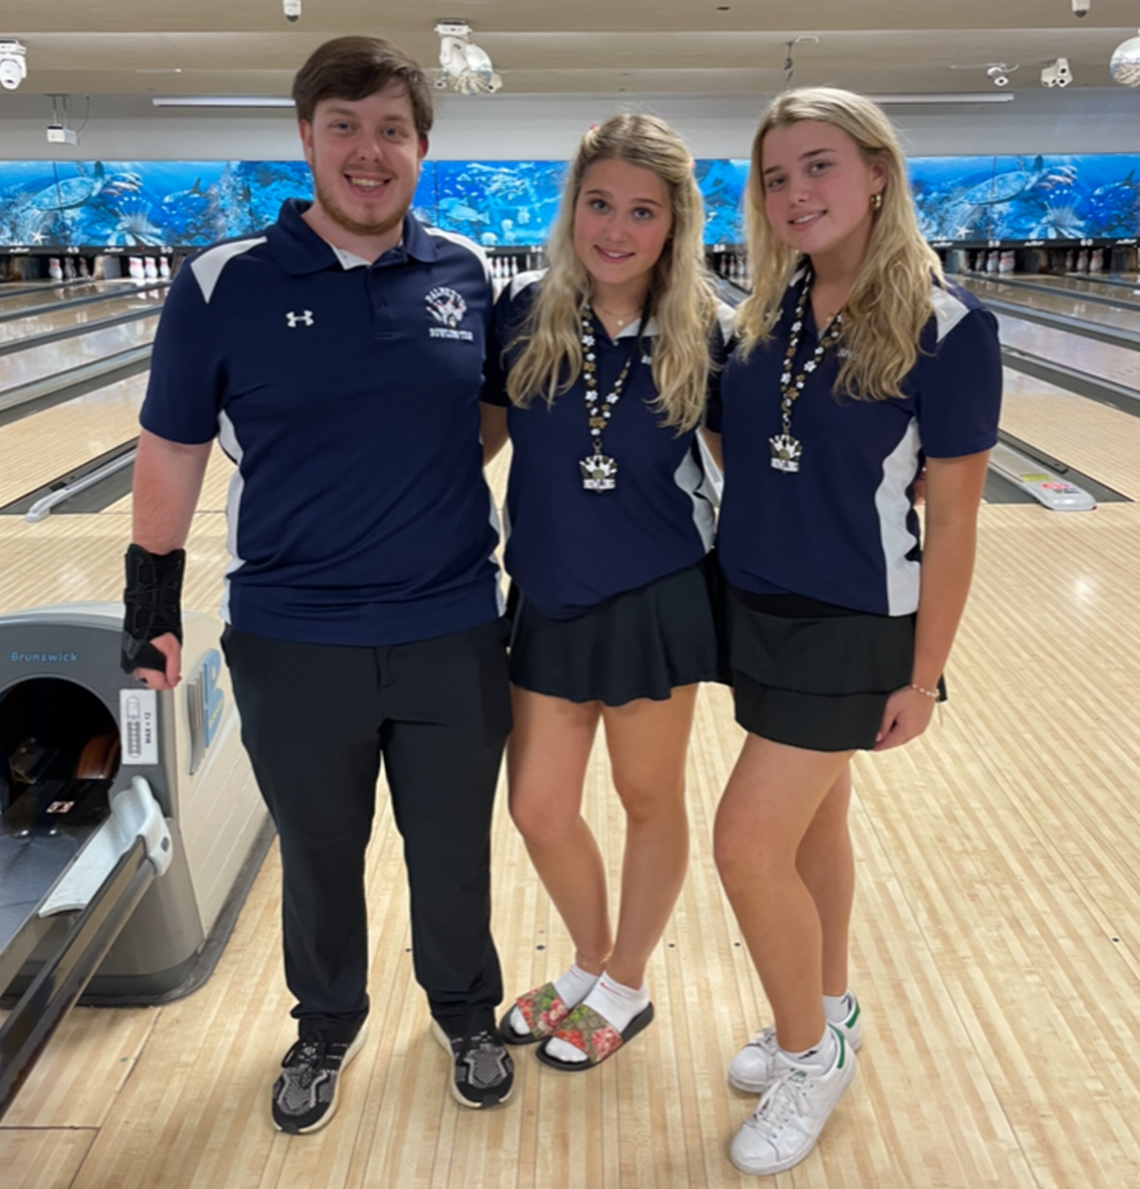 Palmetto bowlers Evan Viener, Maggie Meltzer and Halle Meltzer qualified for state.